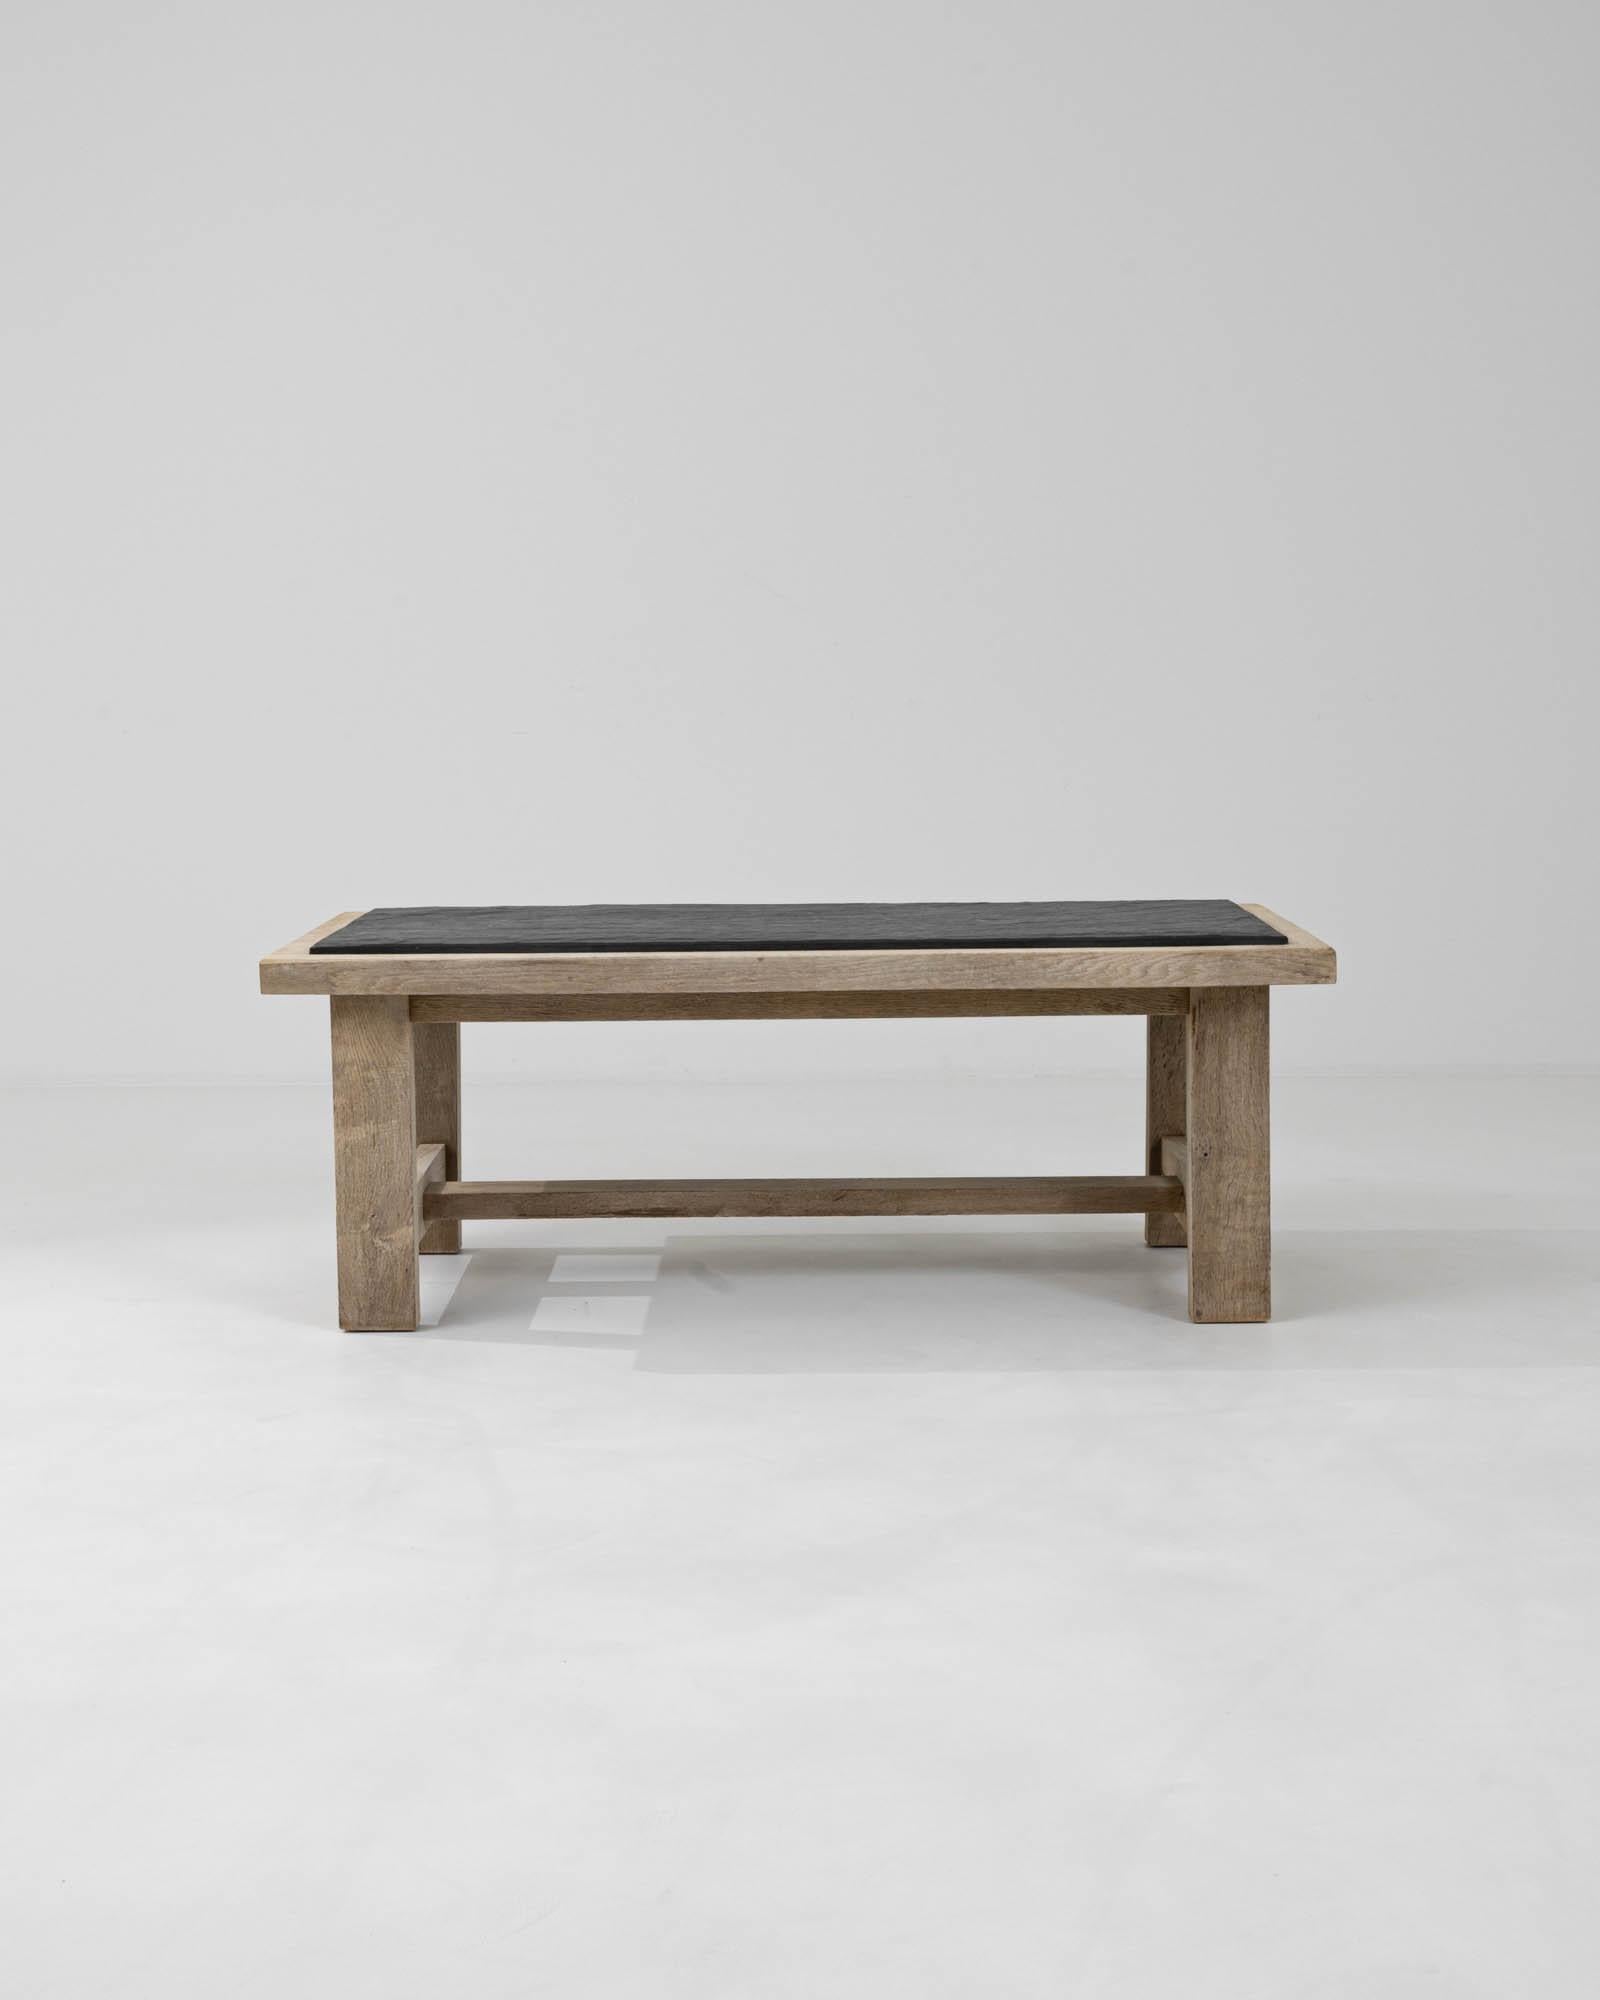 Discover the rustic charm and timeless elegance of this 20th Century Belgian Bleached Oak Coffee Table, featuring a stunning stone top. Meticulously crafted from bleached oak, its natural grain and weathered texture offer an air of antique